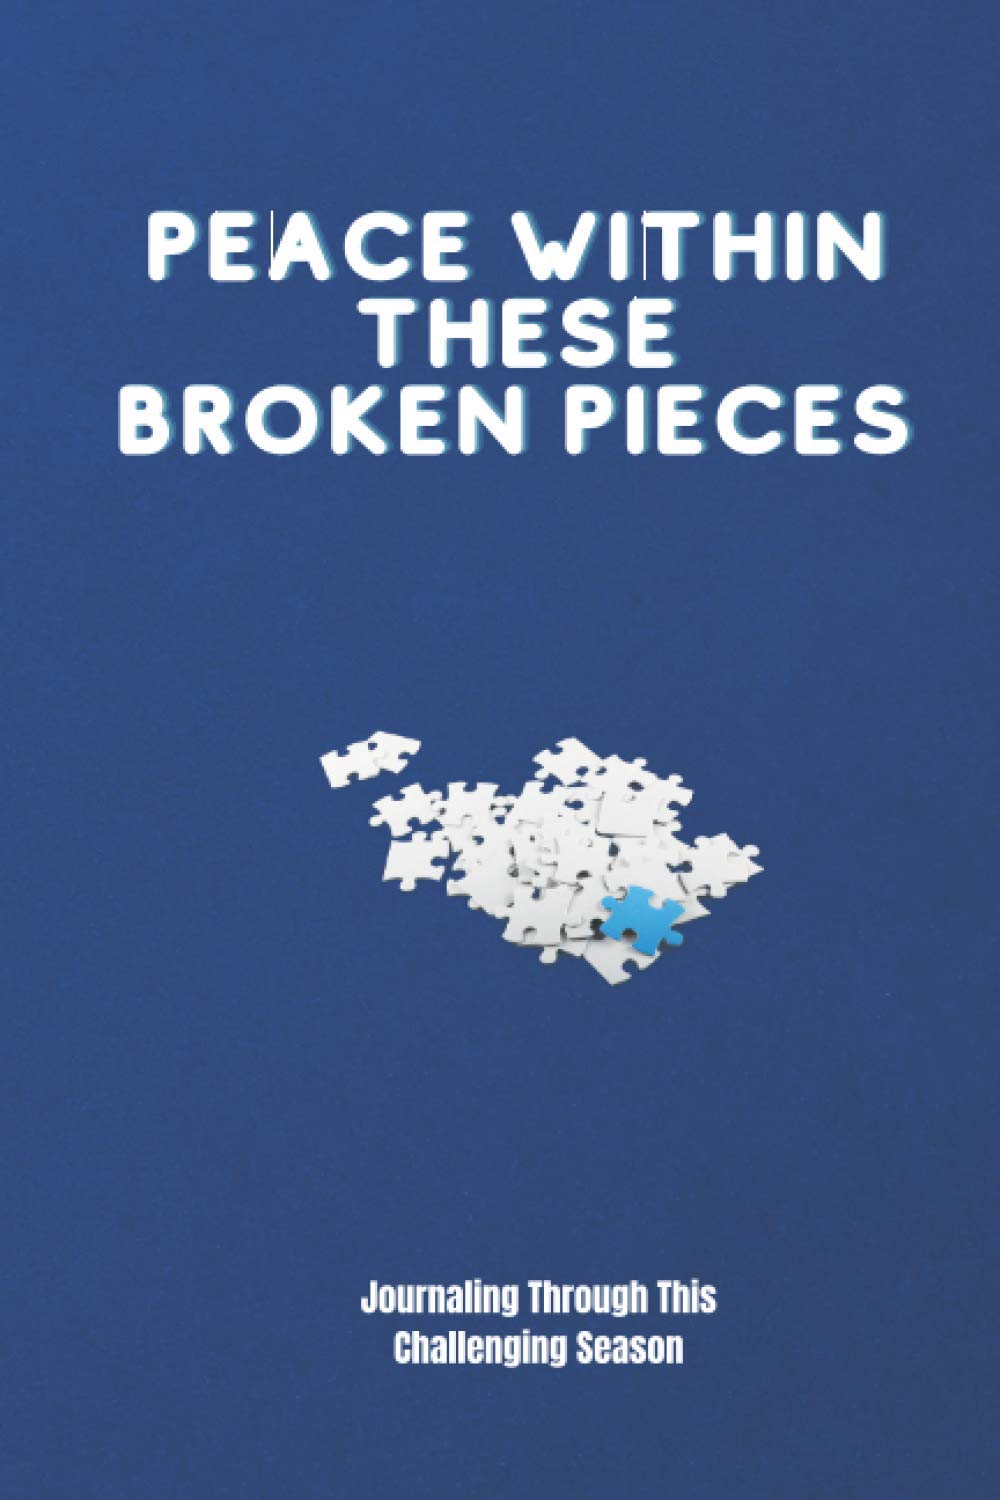 PEACE WITHIN THESE BROKEN PIECES: JOURNALING THROUGH THIS CHALLENGING SEASON